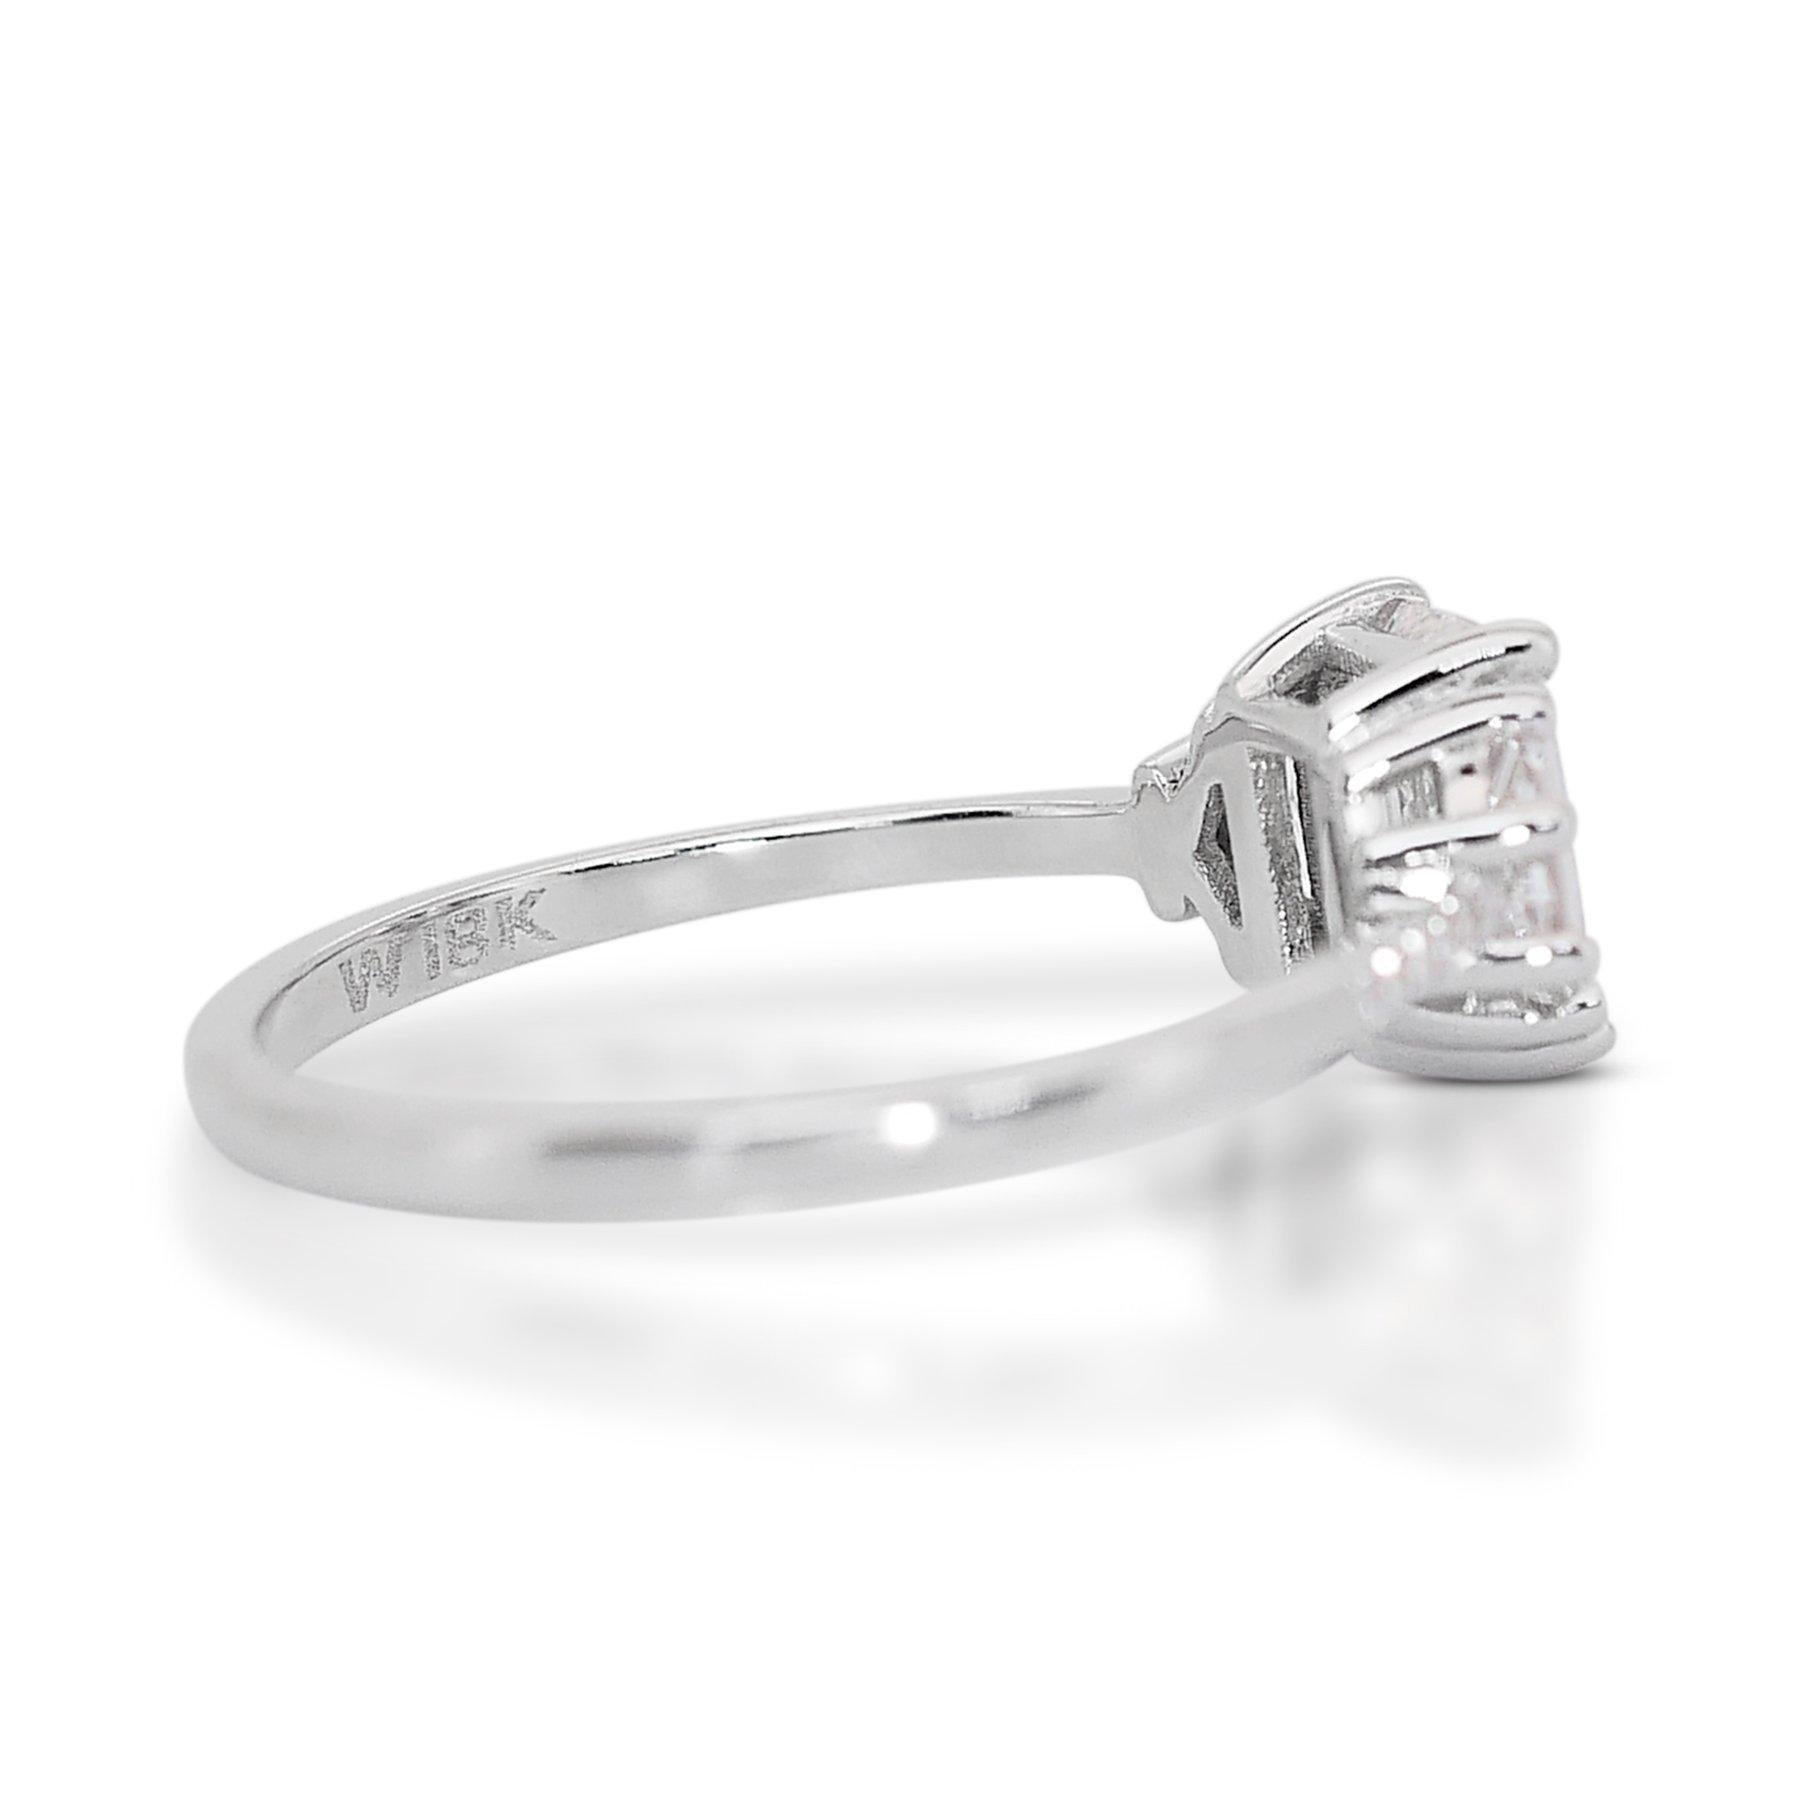 Luxurious 1.20ct Diamond 3-Stone Ring in 18k White Gold - GIA Certified  In New Condition For Sale In רמת גן, IL